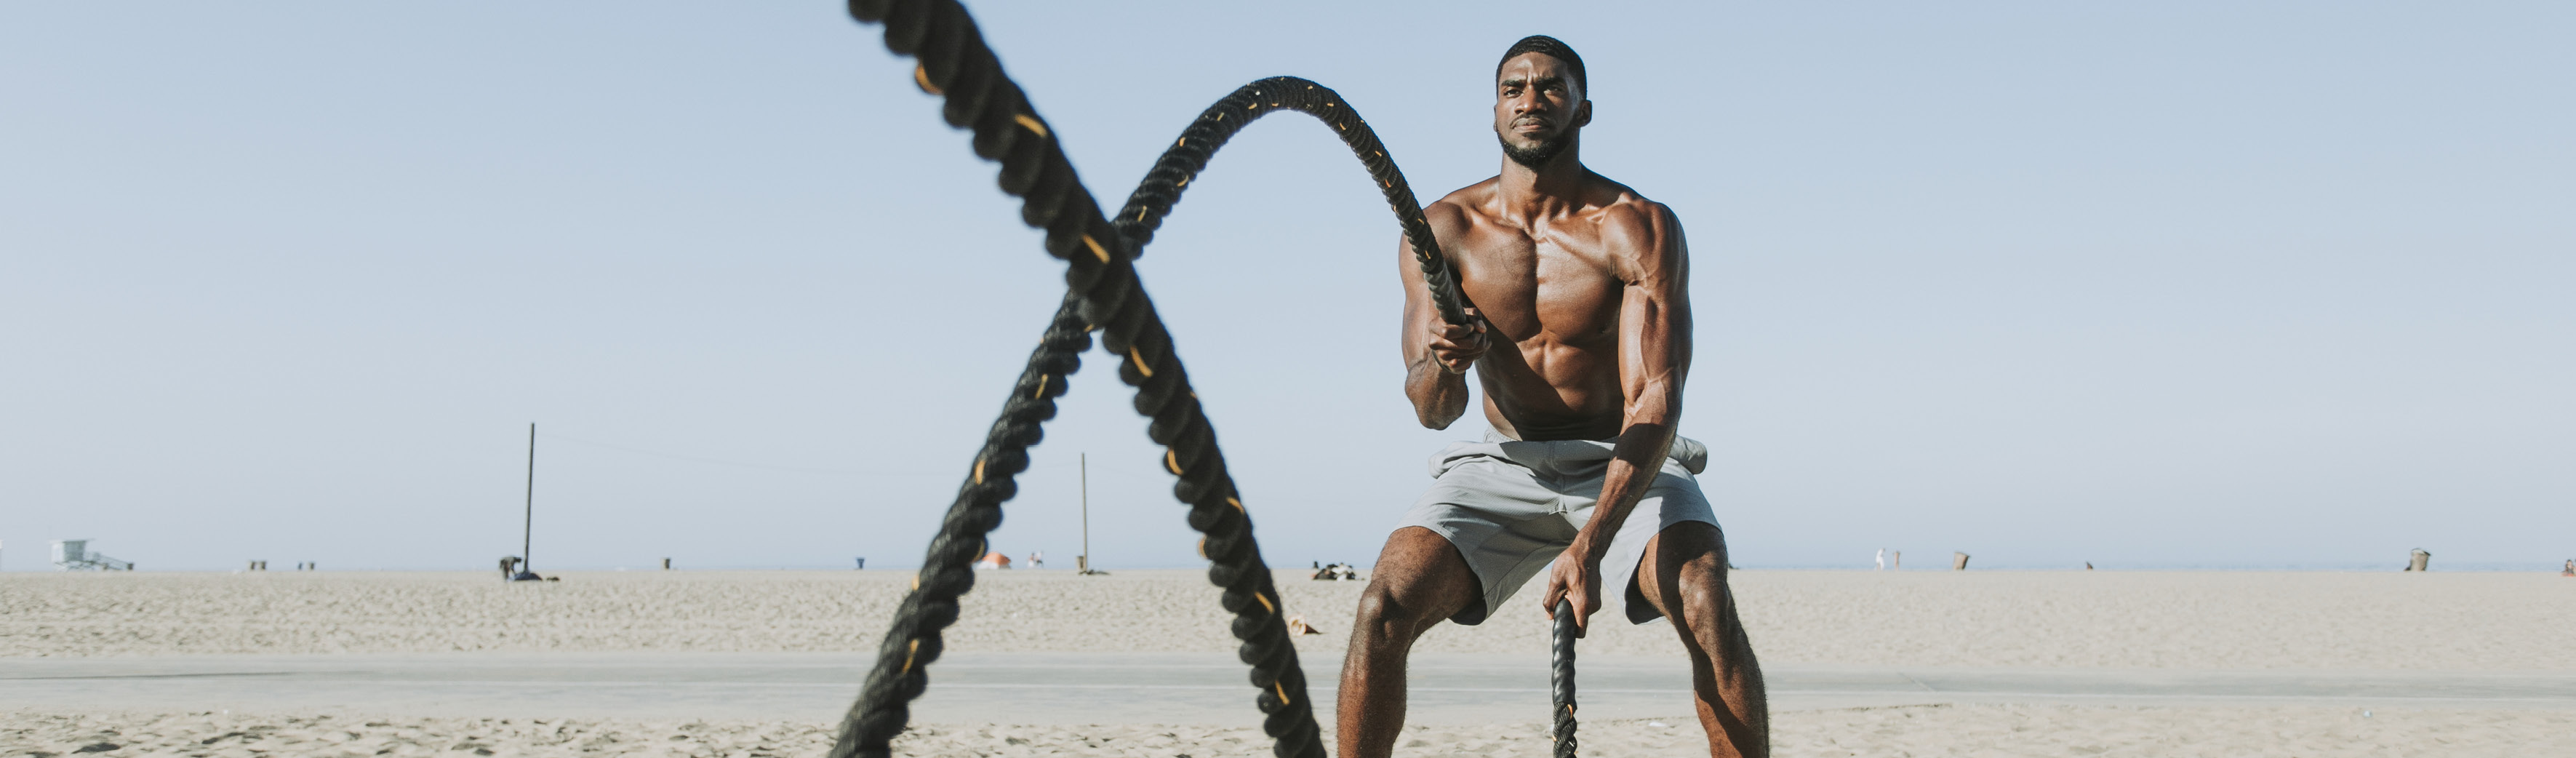 7 Tips to Stay on Top of Your Summer Fitness